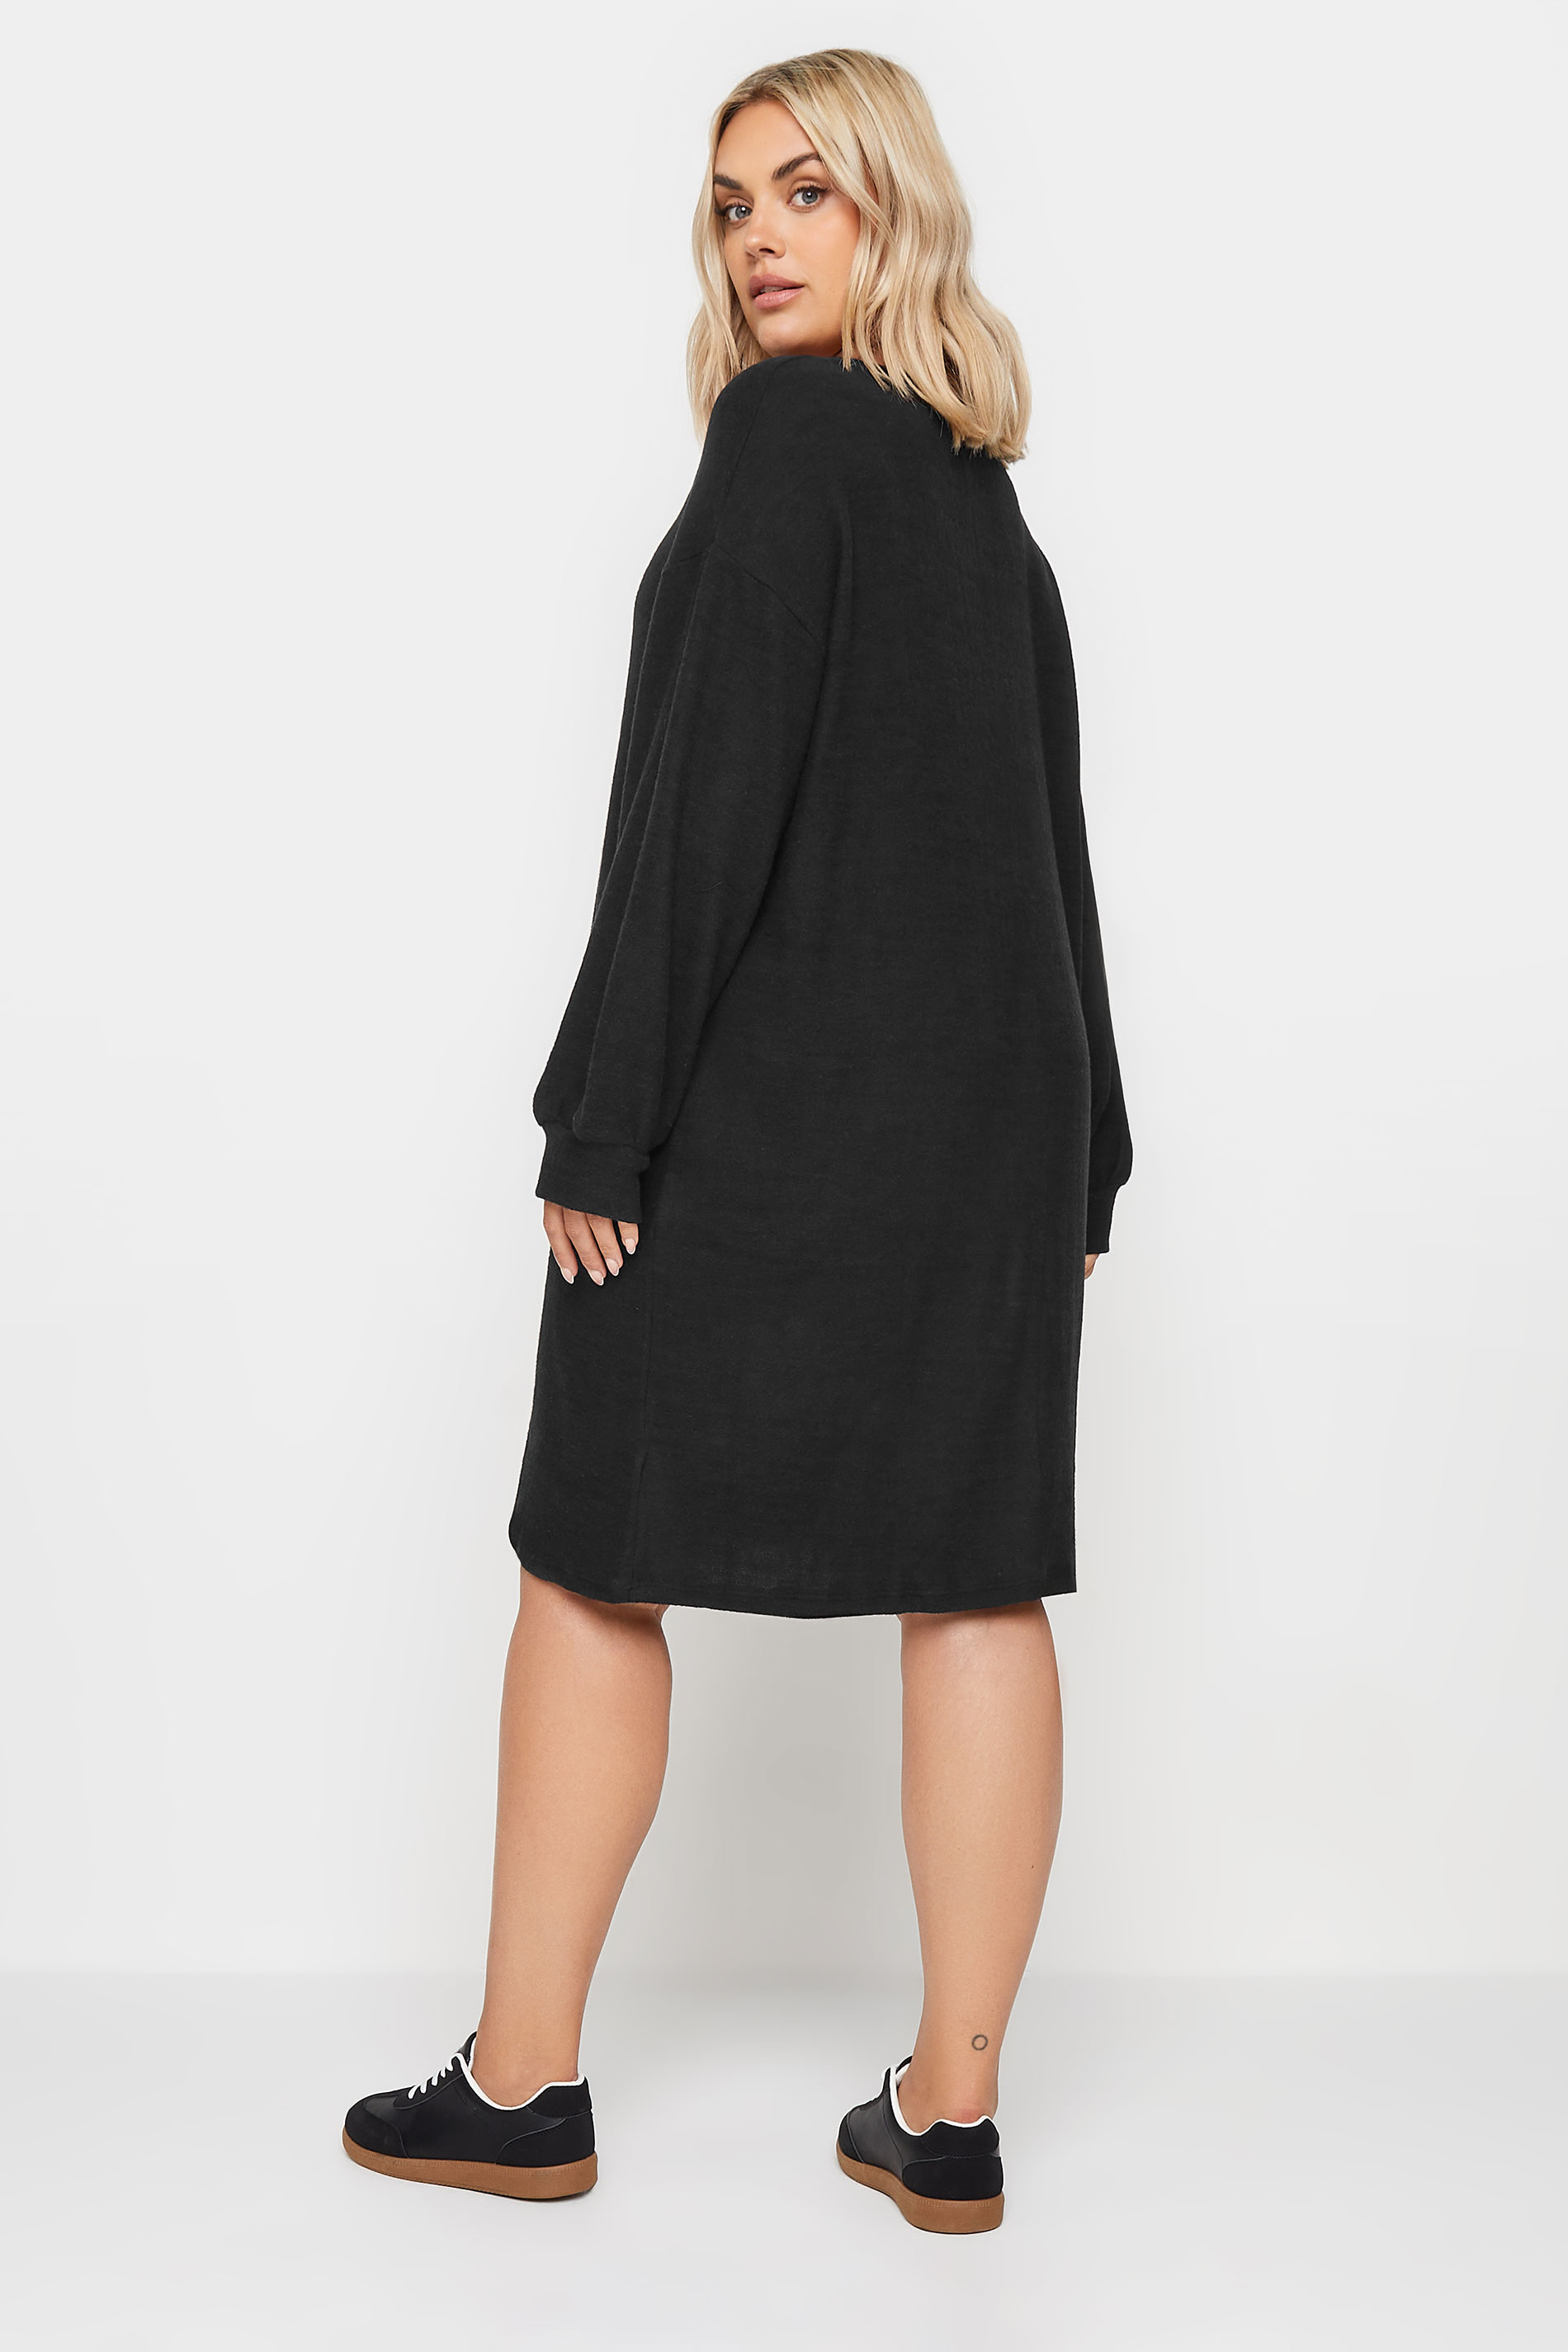 YOURS Plus Size Black Soft Touch Knitted Jumper Dress | Yours Clothing 3